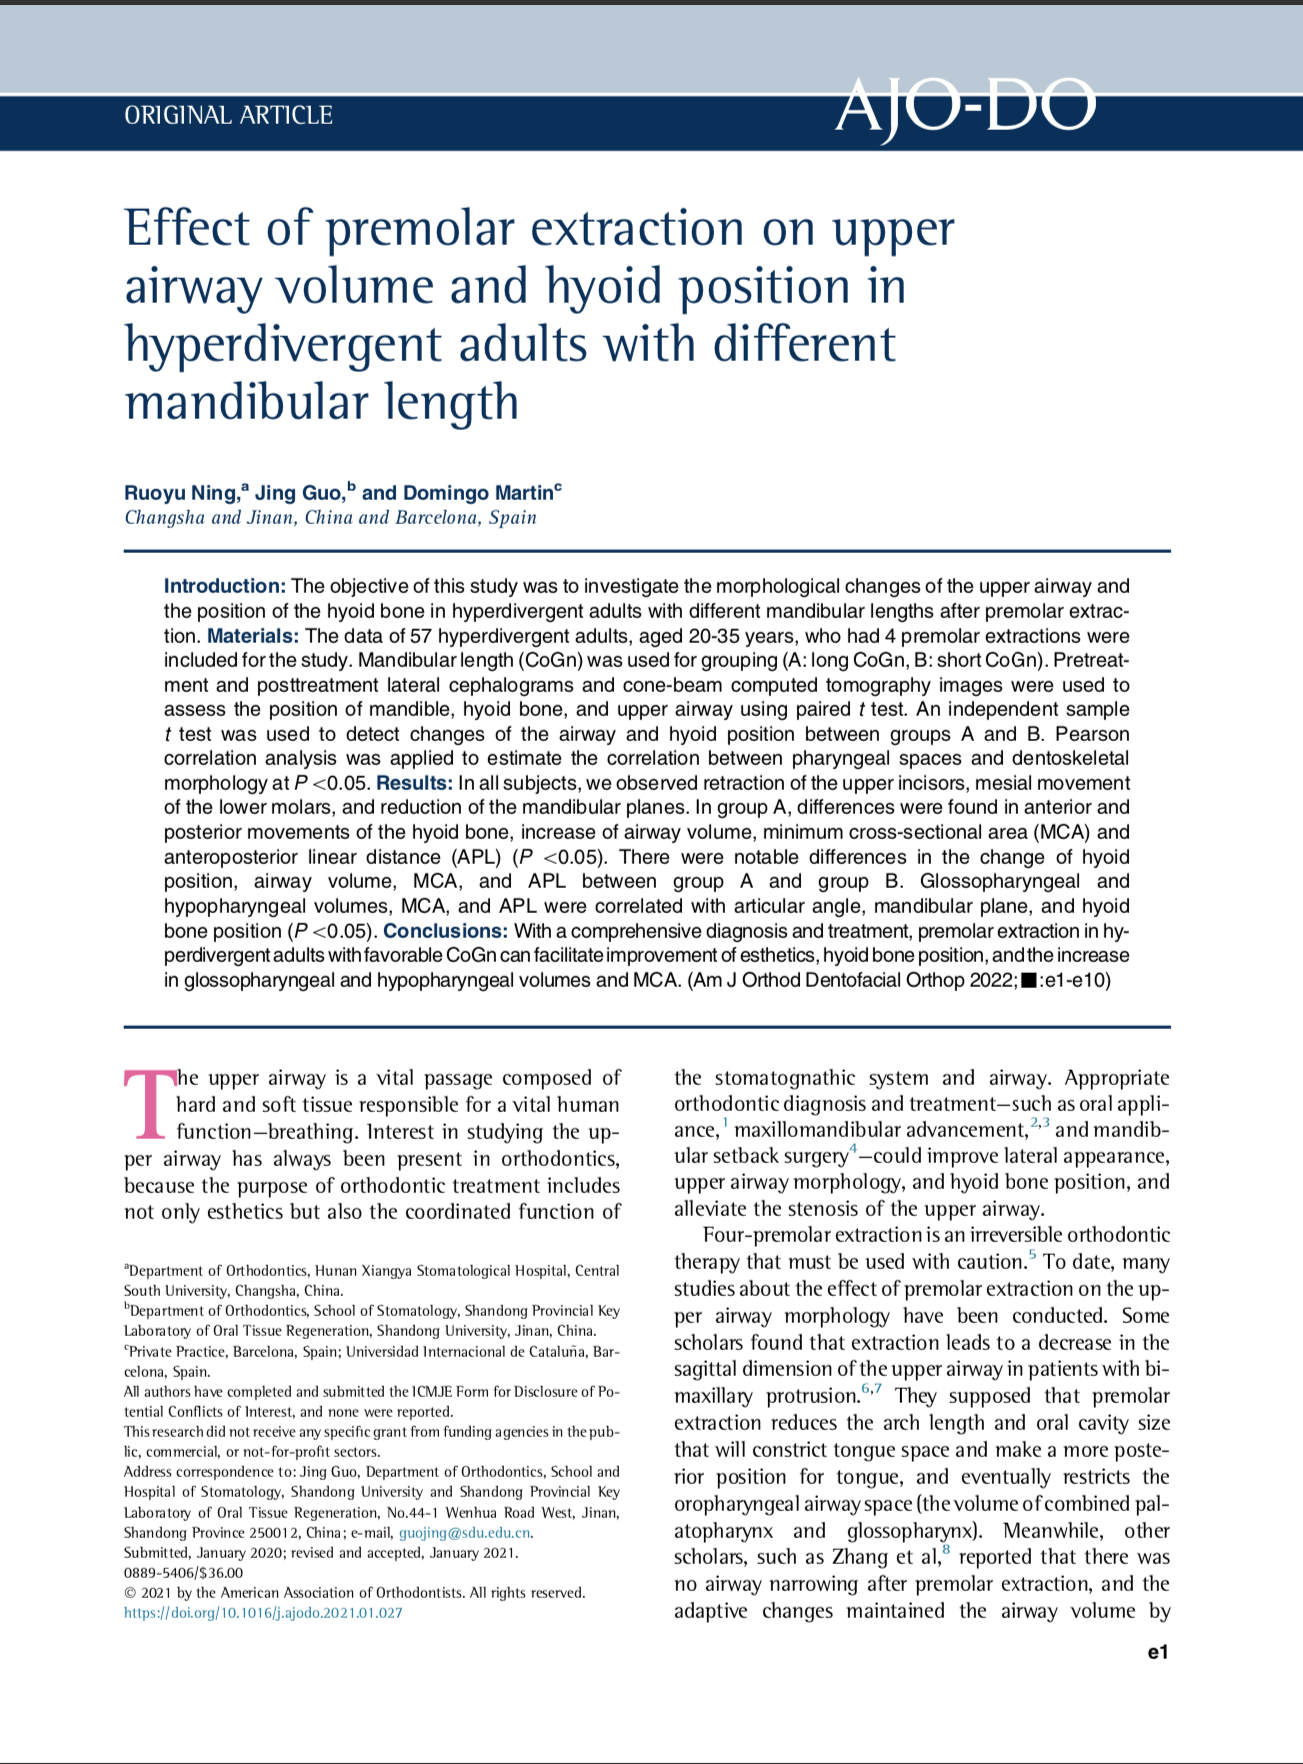 Effect of premolar extraction on upper airway volume and hyoid position in hyperdivergent adults with different mandibular length